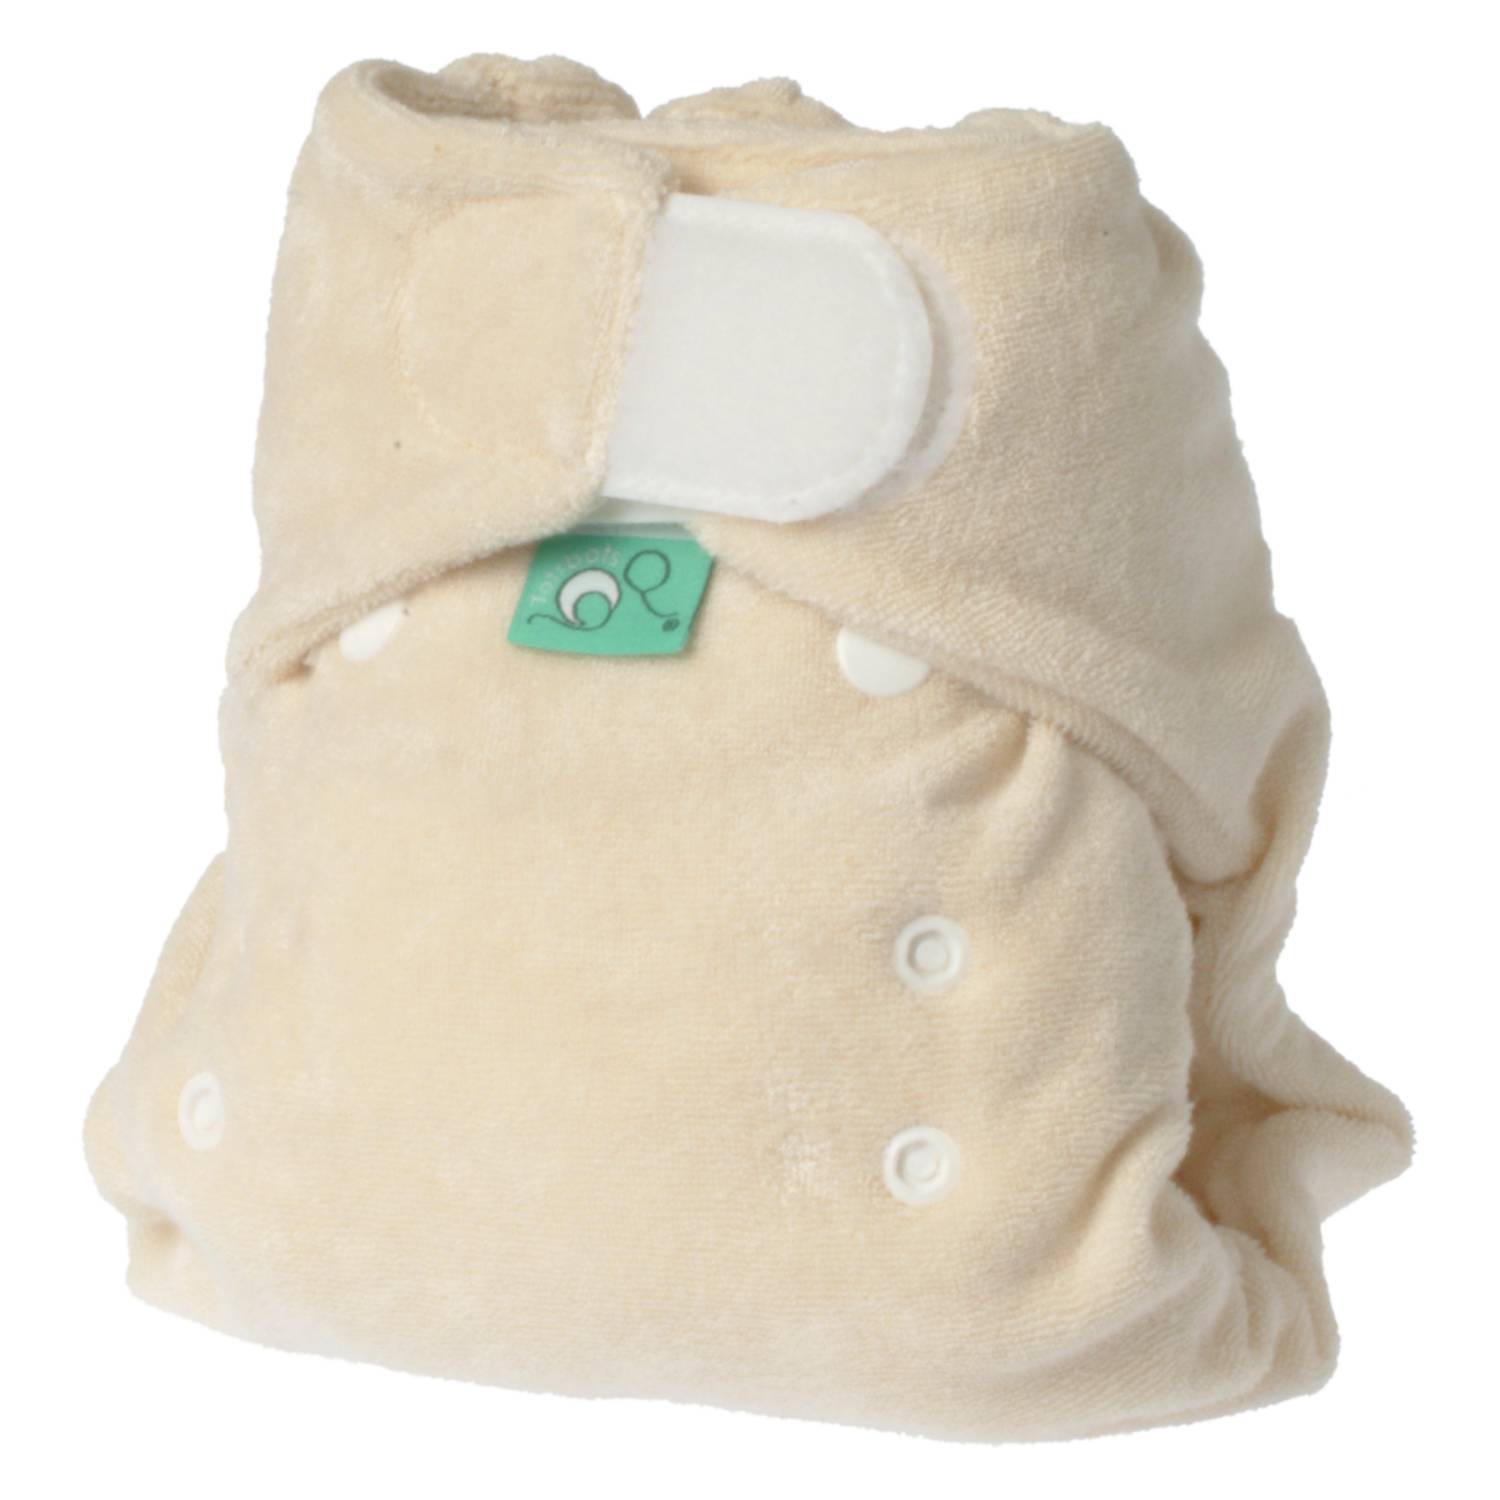 TotsBots Bamboozle Fitted Nappy Size: One Size (4 - 16kg) / TotsBots pattern: Natural